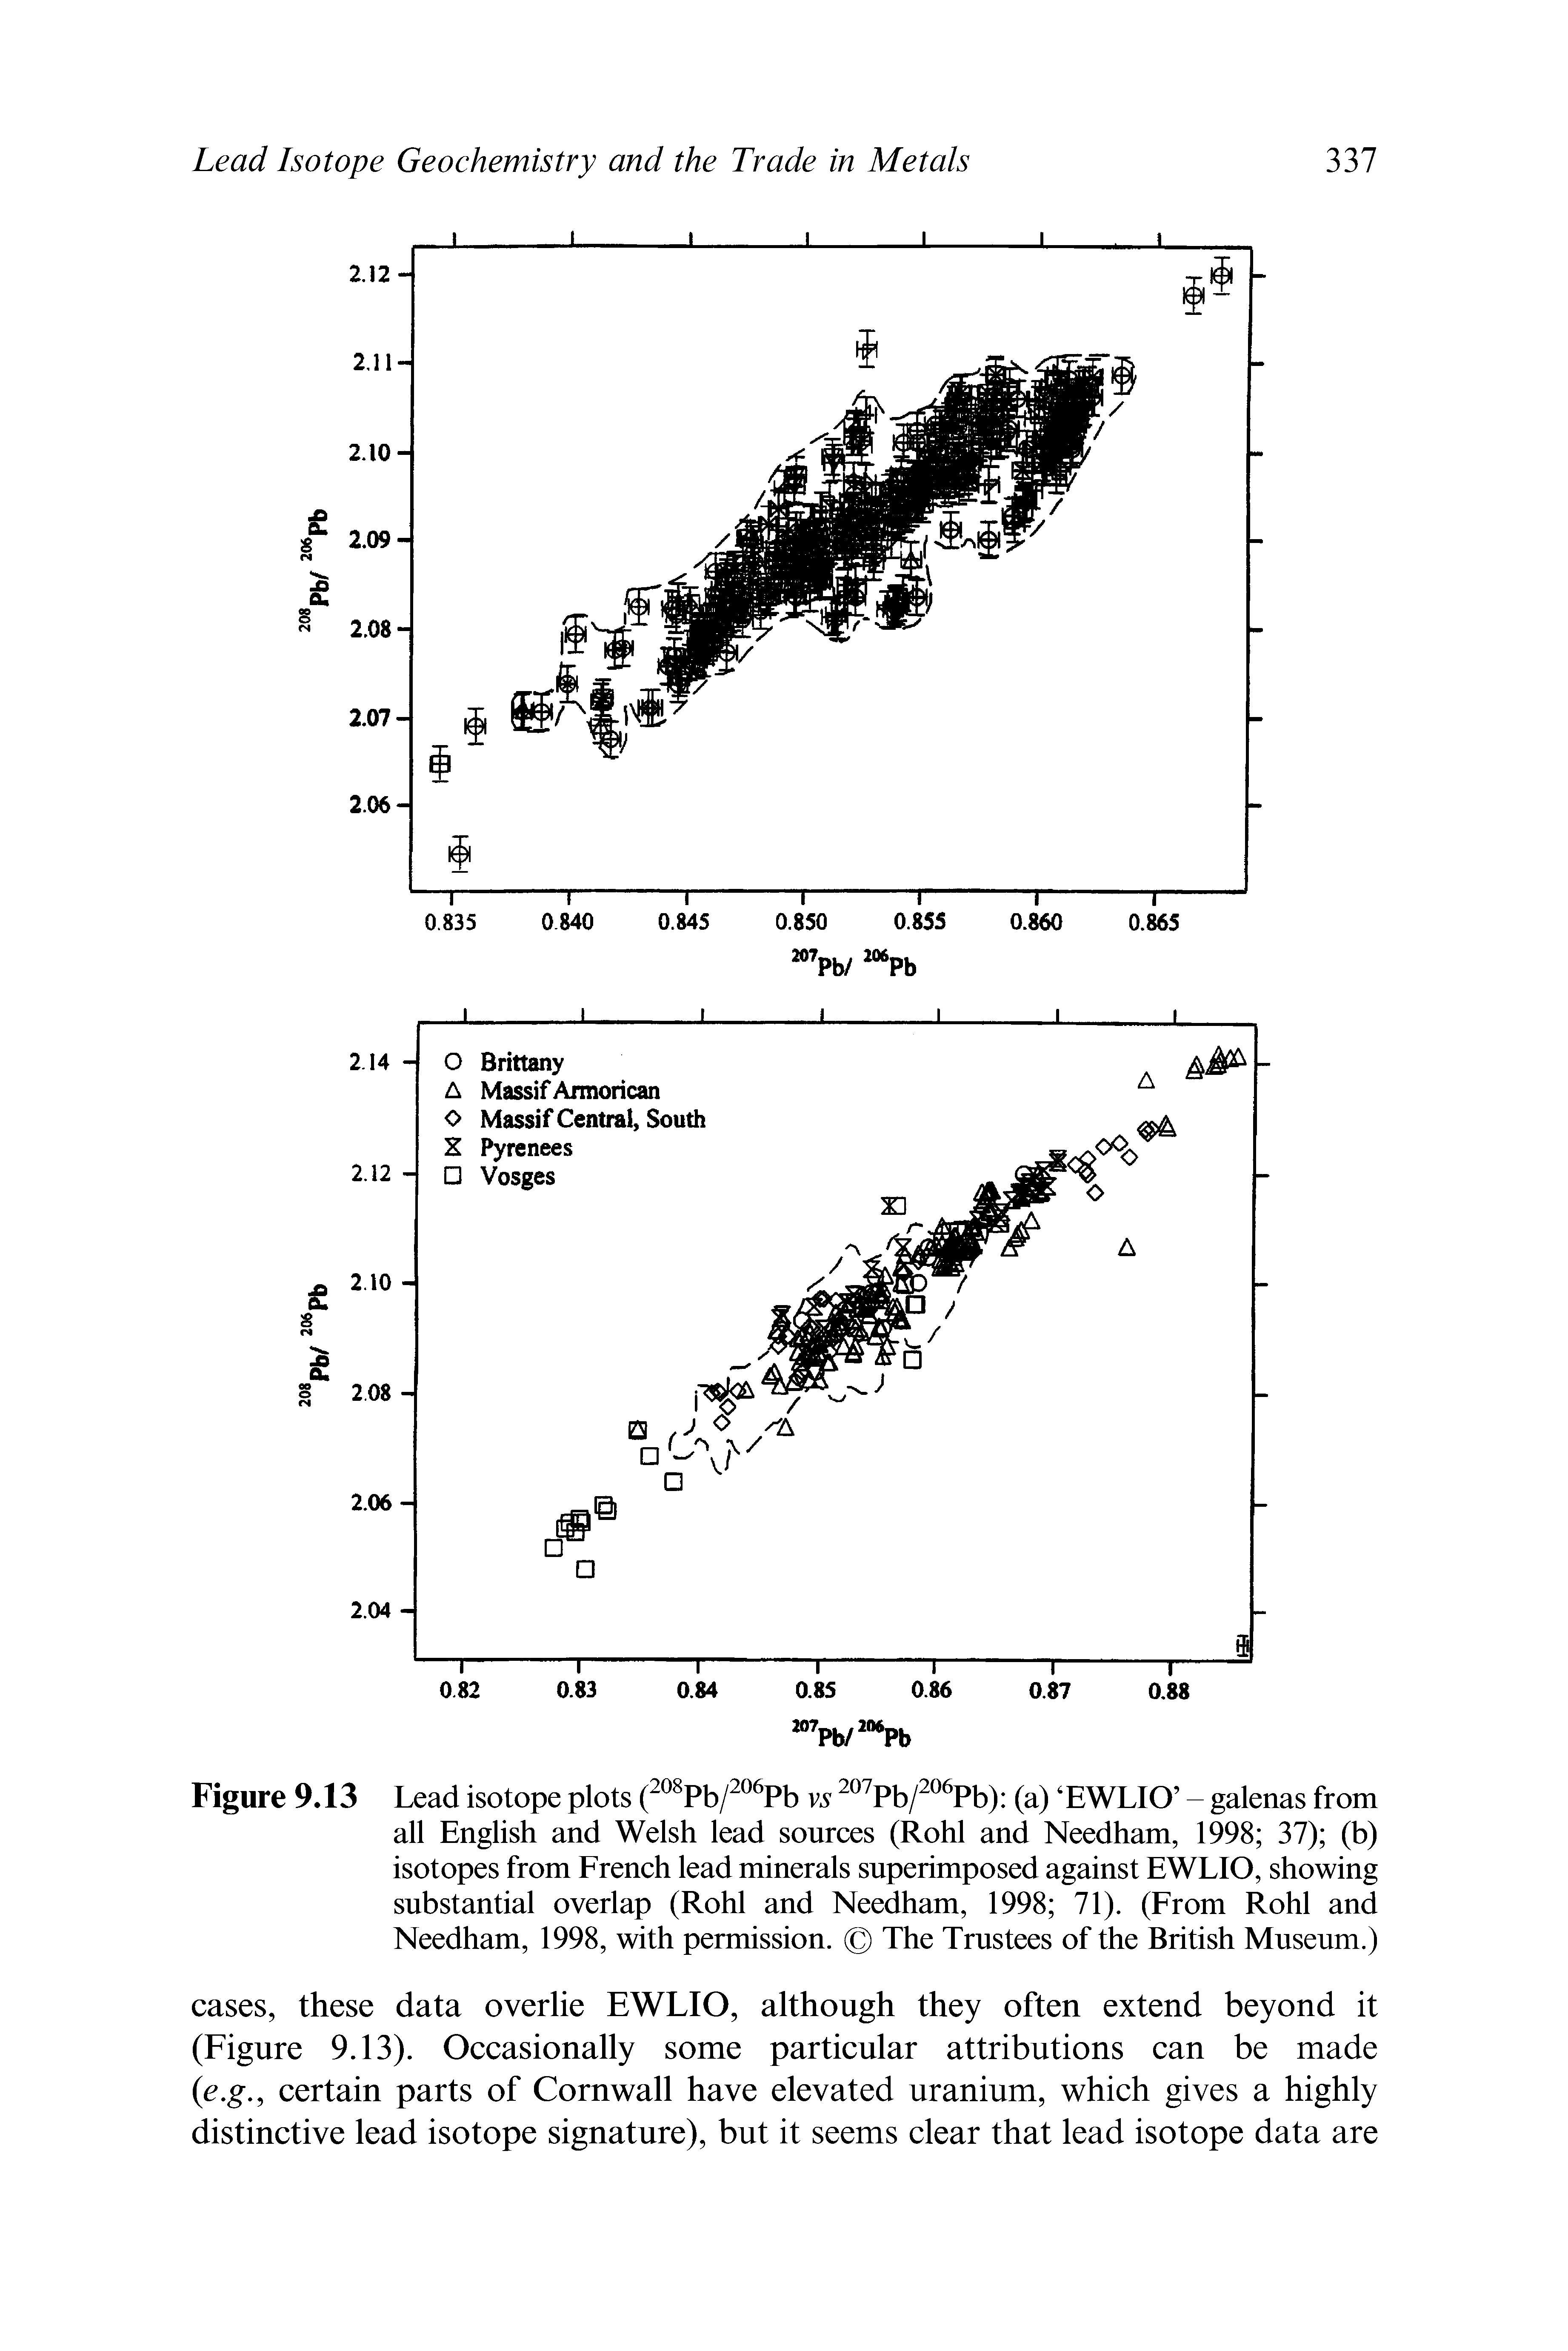 Figure 9.13 Lead isotope plots (208Pb/206Pb vs 207Pb/206Pb) (a) EWLIO - galenas from all English and Welsh lead sources (Rohl and Needham, 1998 37) (b) isotopes from French lead minerals superimposed against EWLIO, showing substantial overlap (Rohl and Needham, 1998 71). (From Rohl and Needham, 1998, with permission. The Trustees of the British Museum.)...